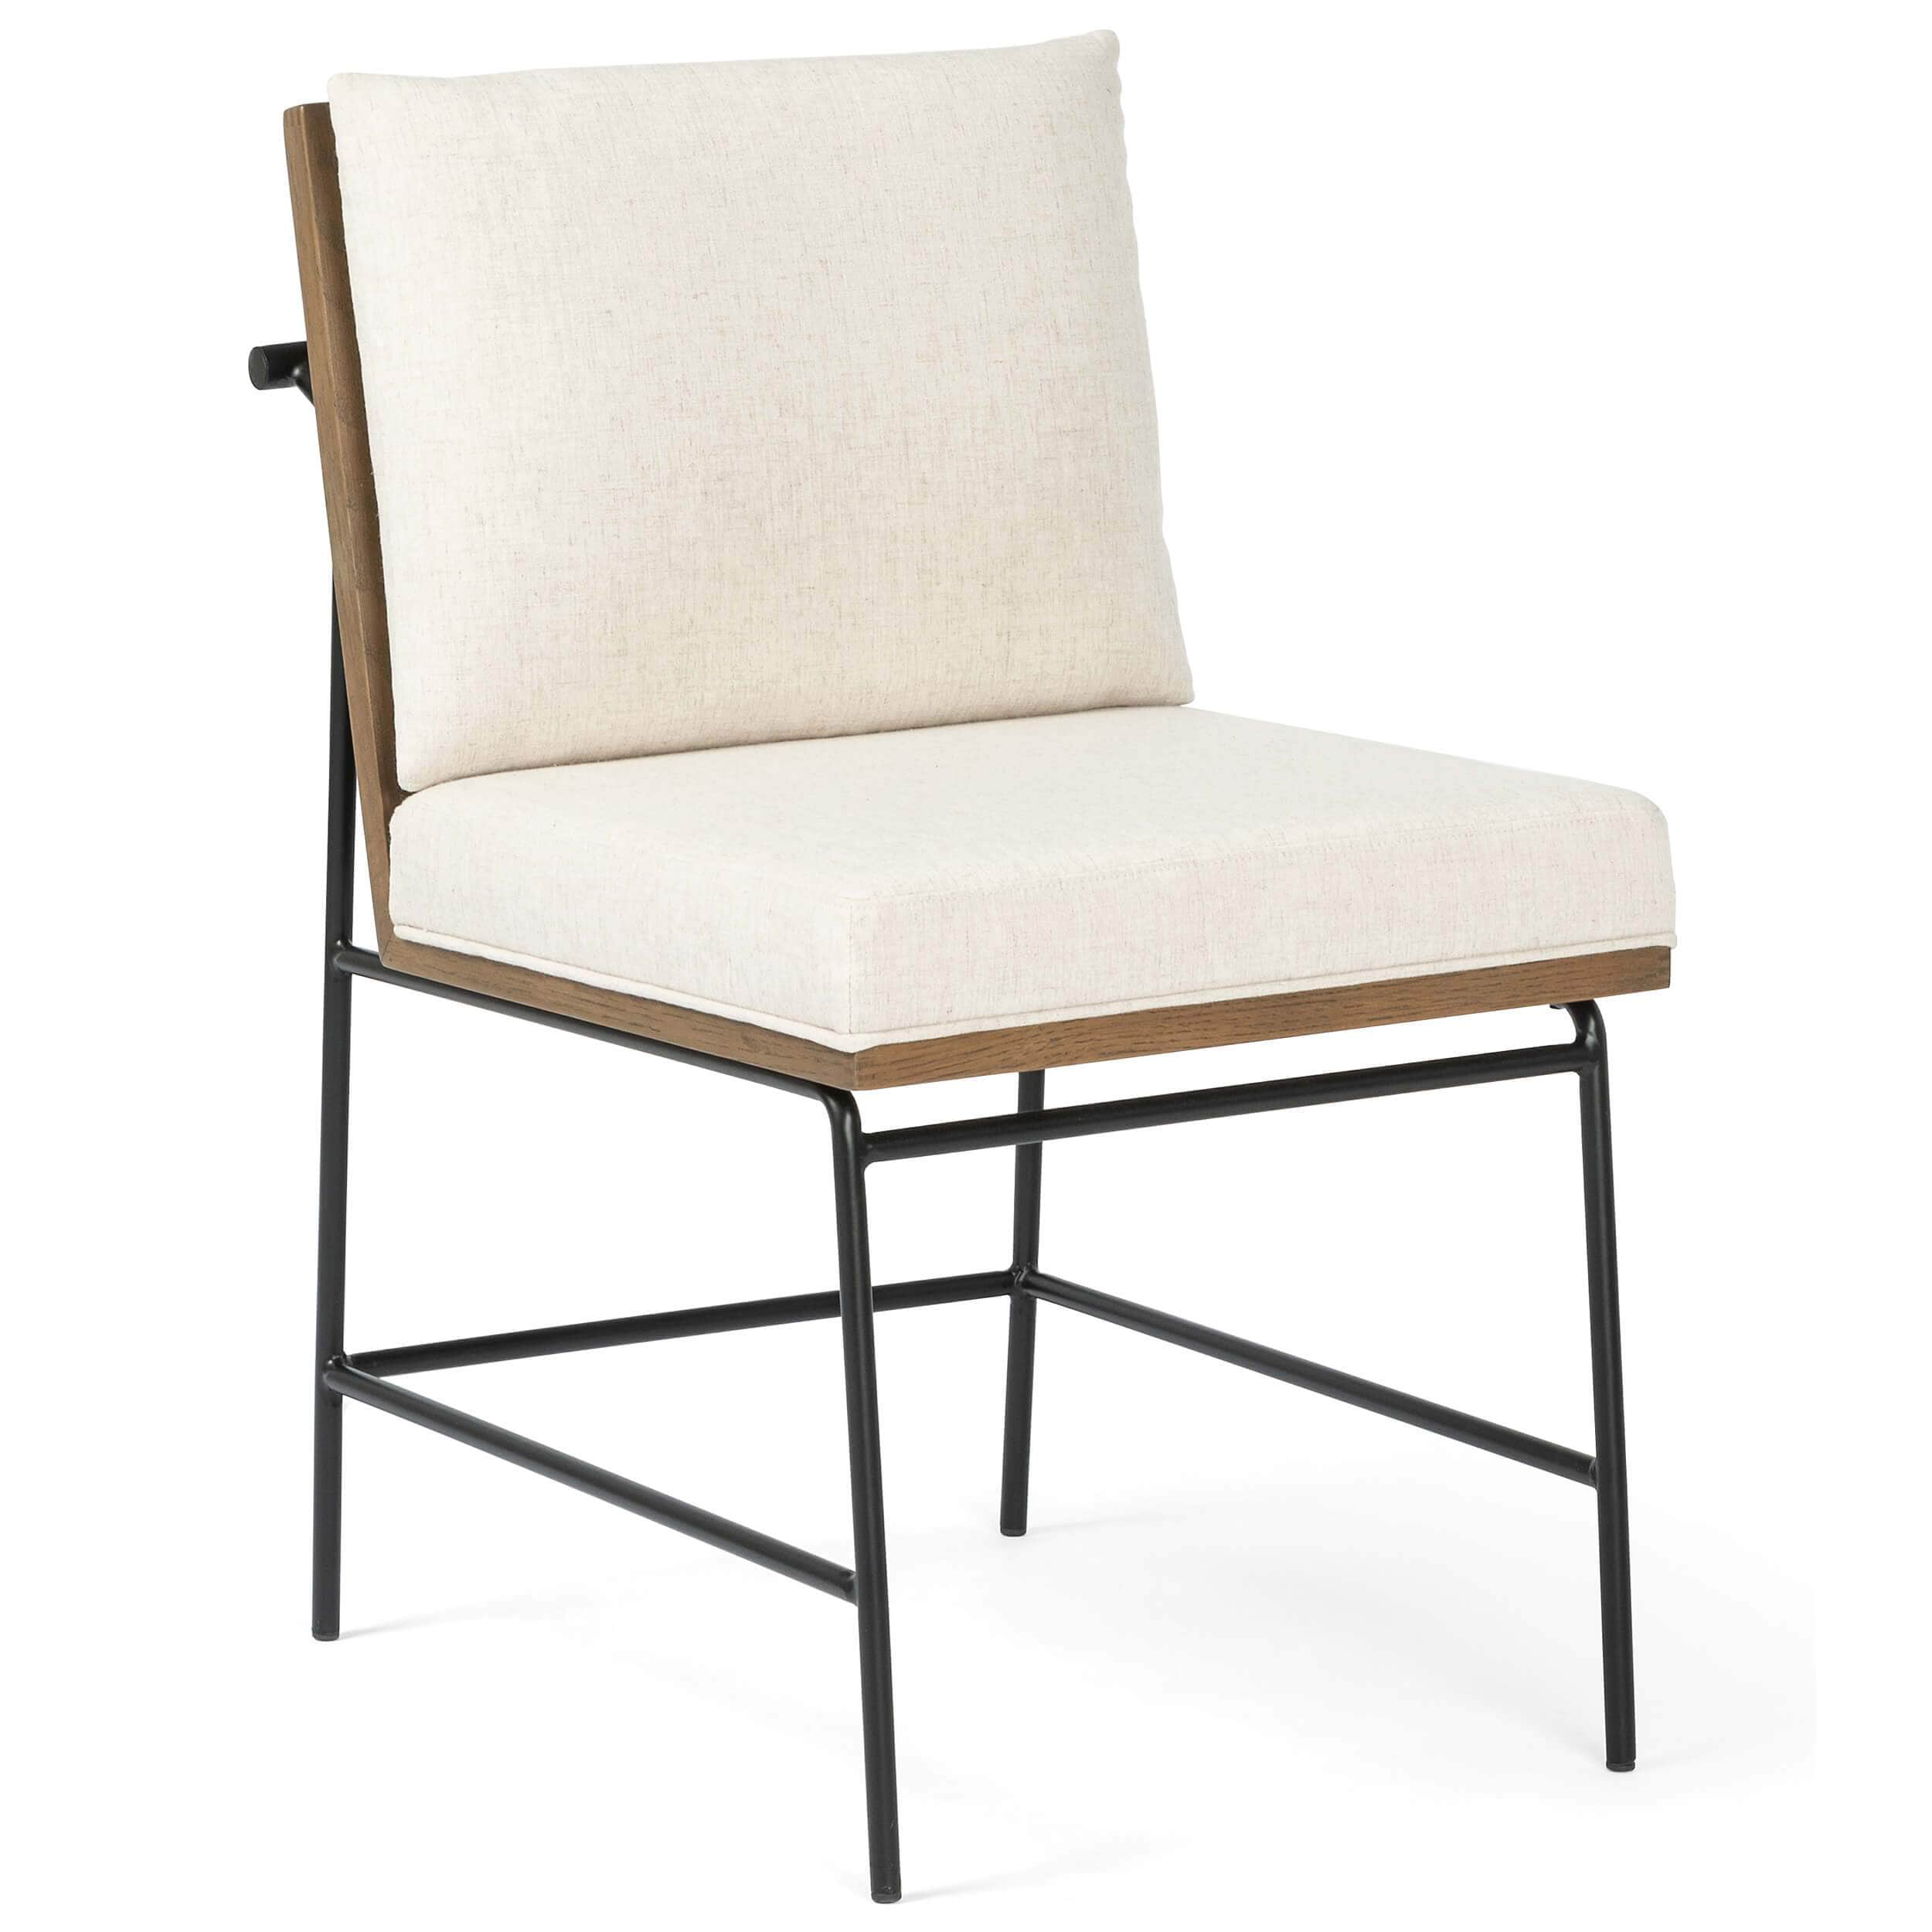 Image of Crete Dining Chair, Savile Flax / Brown Frame, Set of 2